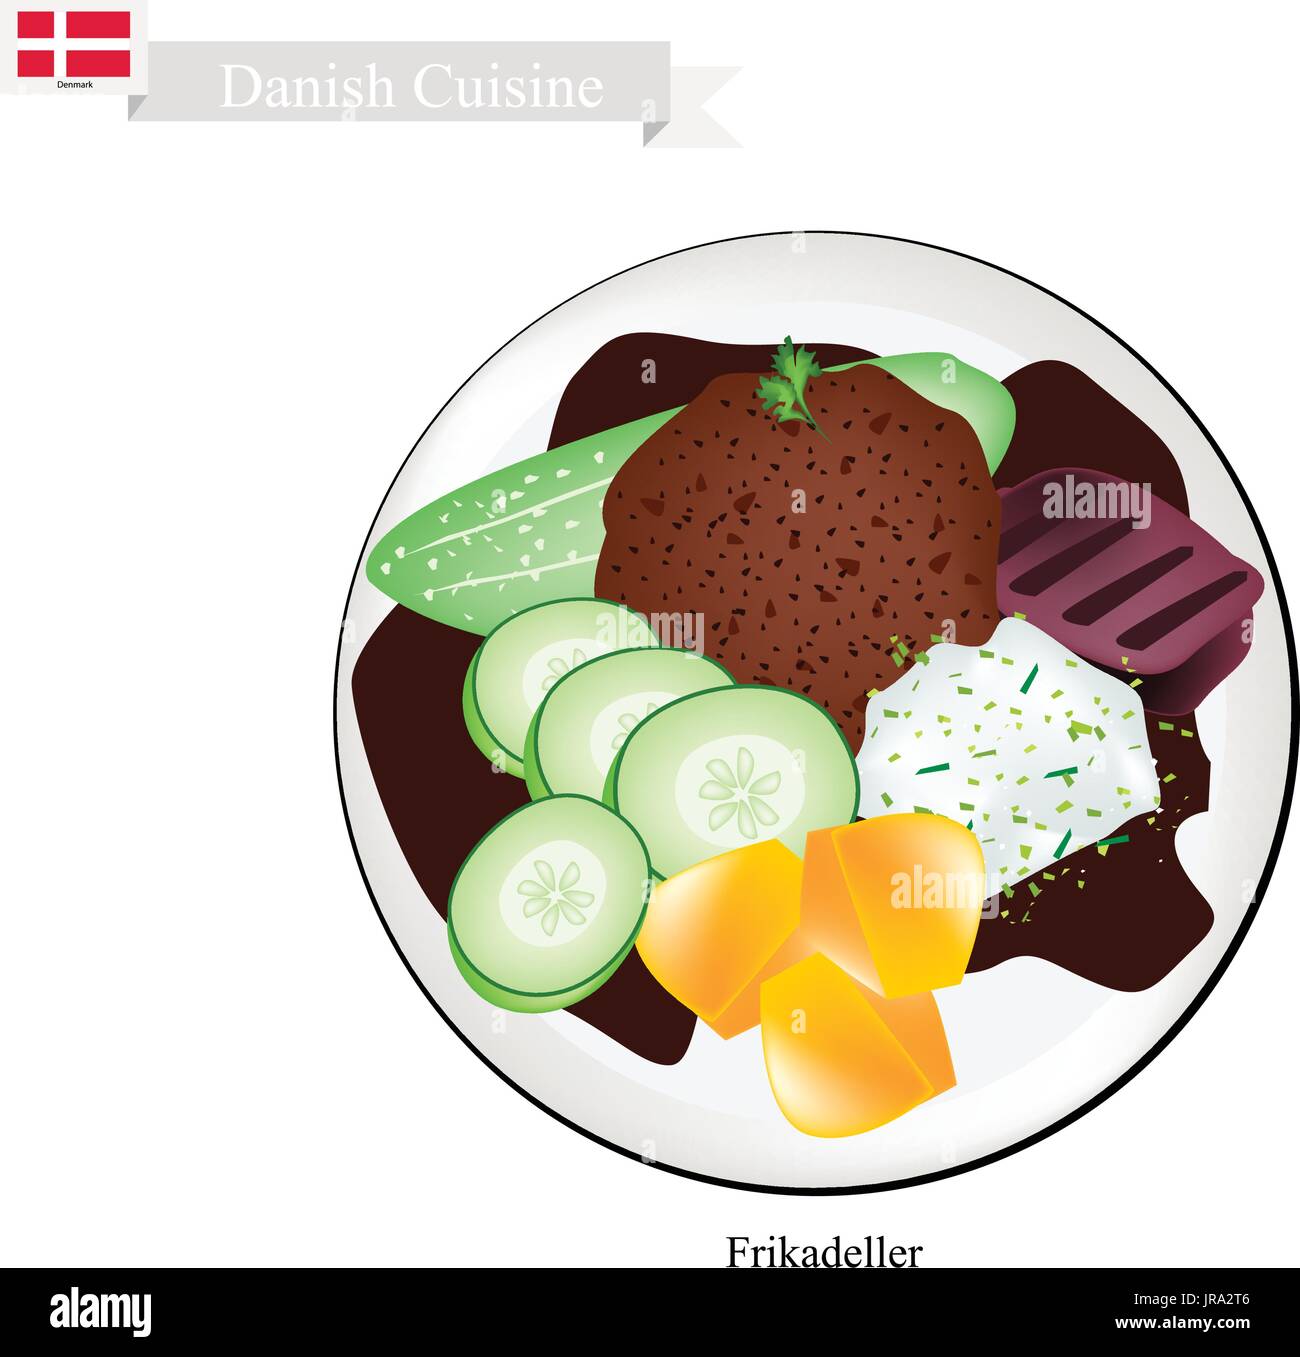 Danish Cuisine, Illustration of Frikadeller or Traditional Pan Fried Ground Beef Patty Served with Boiled Potatoes, Cucumber and Gravy or Creamed Cabb Stock Vector